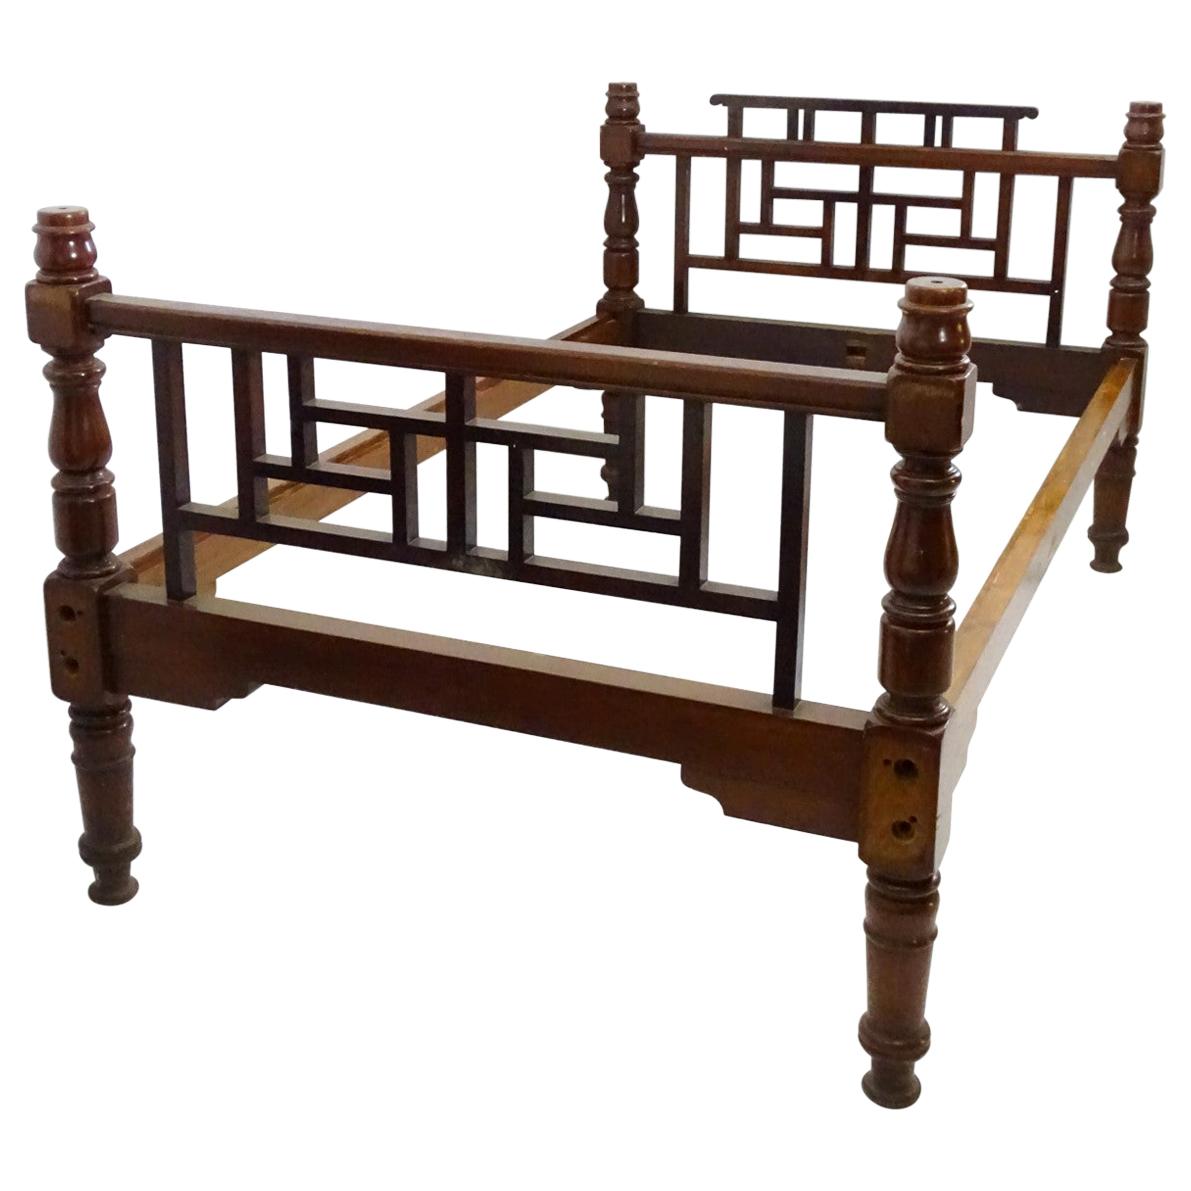 E W Godwin Style Rare Anglo-Japanese Walnut Double Bed with Lattice Work Details For Sale